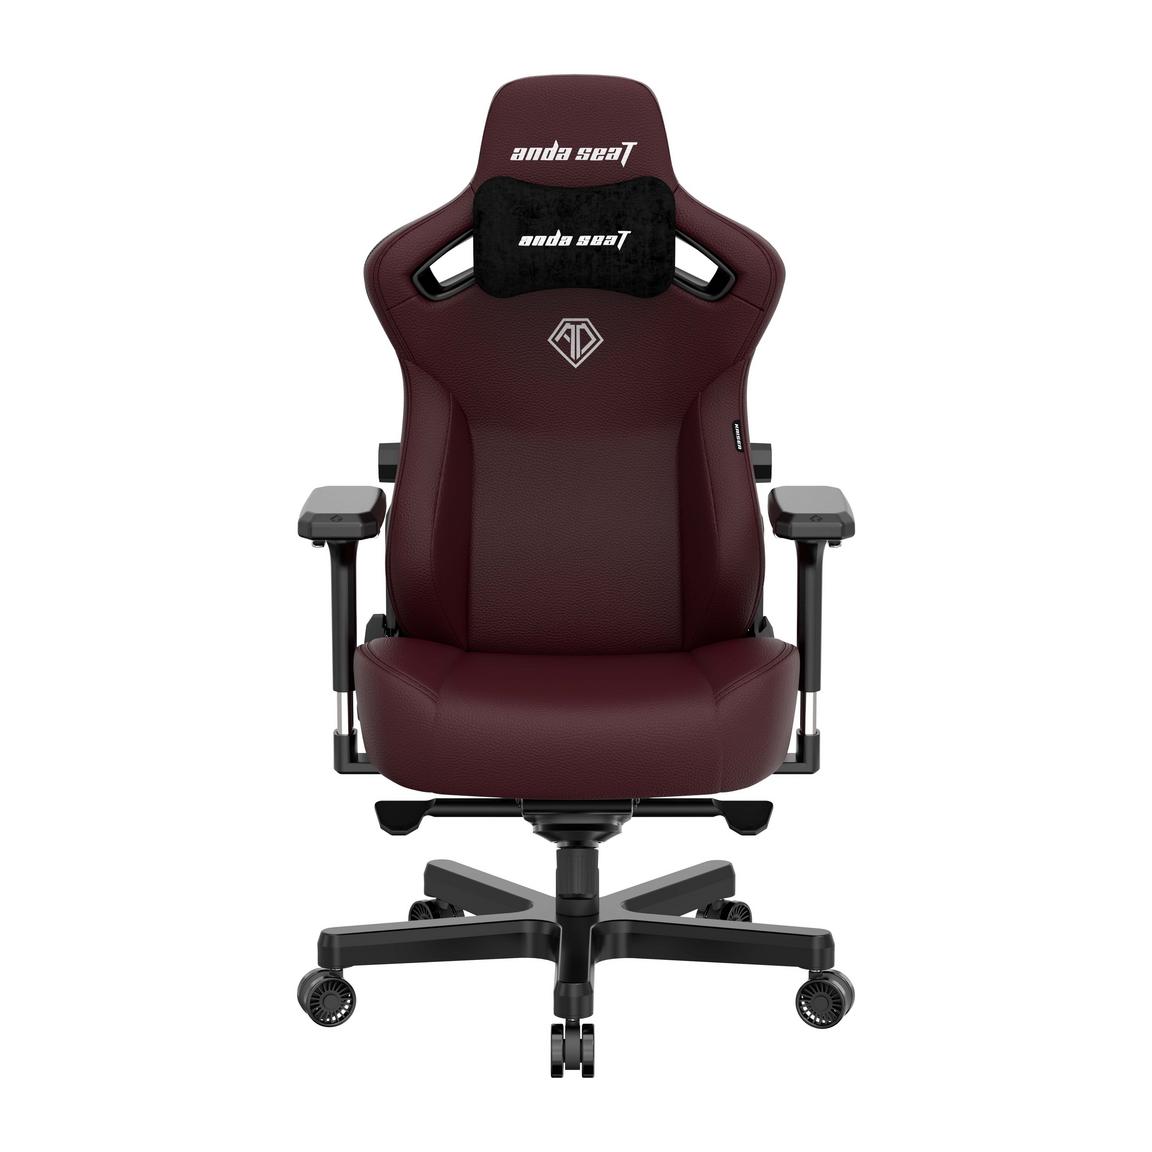 AndaSeat Kaiser 3 L Gaming Chair - Maroon PVC Leather